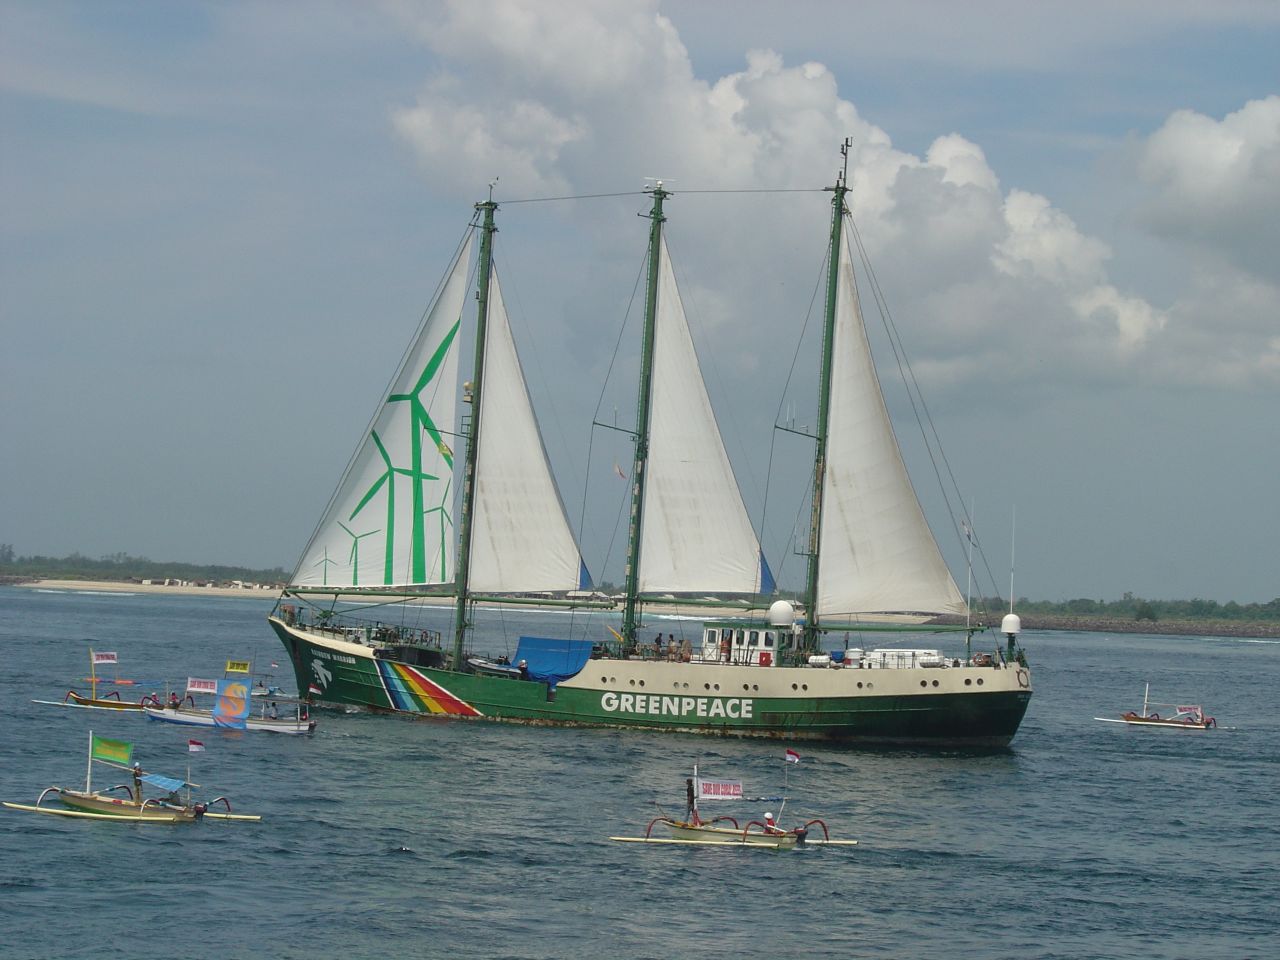 Greenpeace's second Rainbow Warrior ship arrives in Bali for the 2007 UN climate conference.